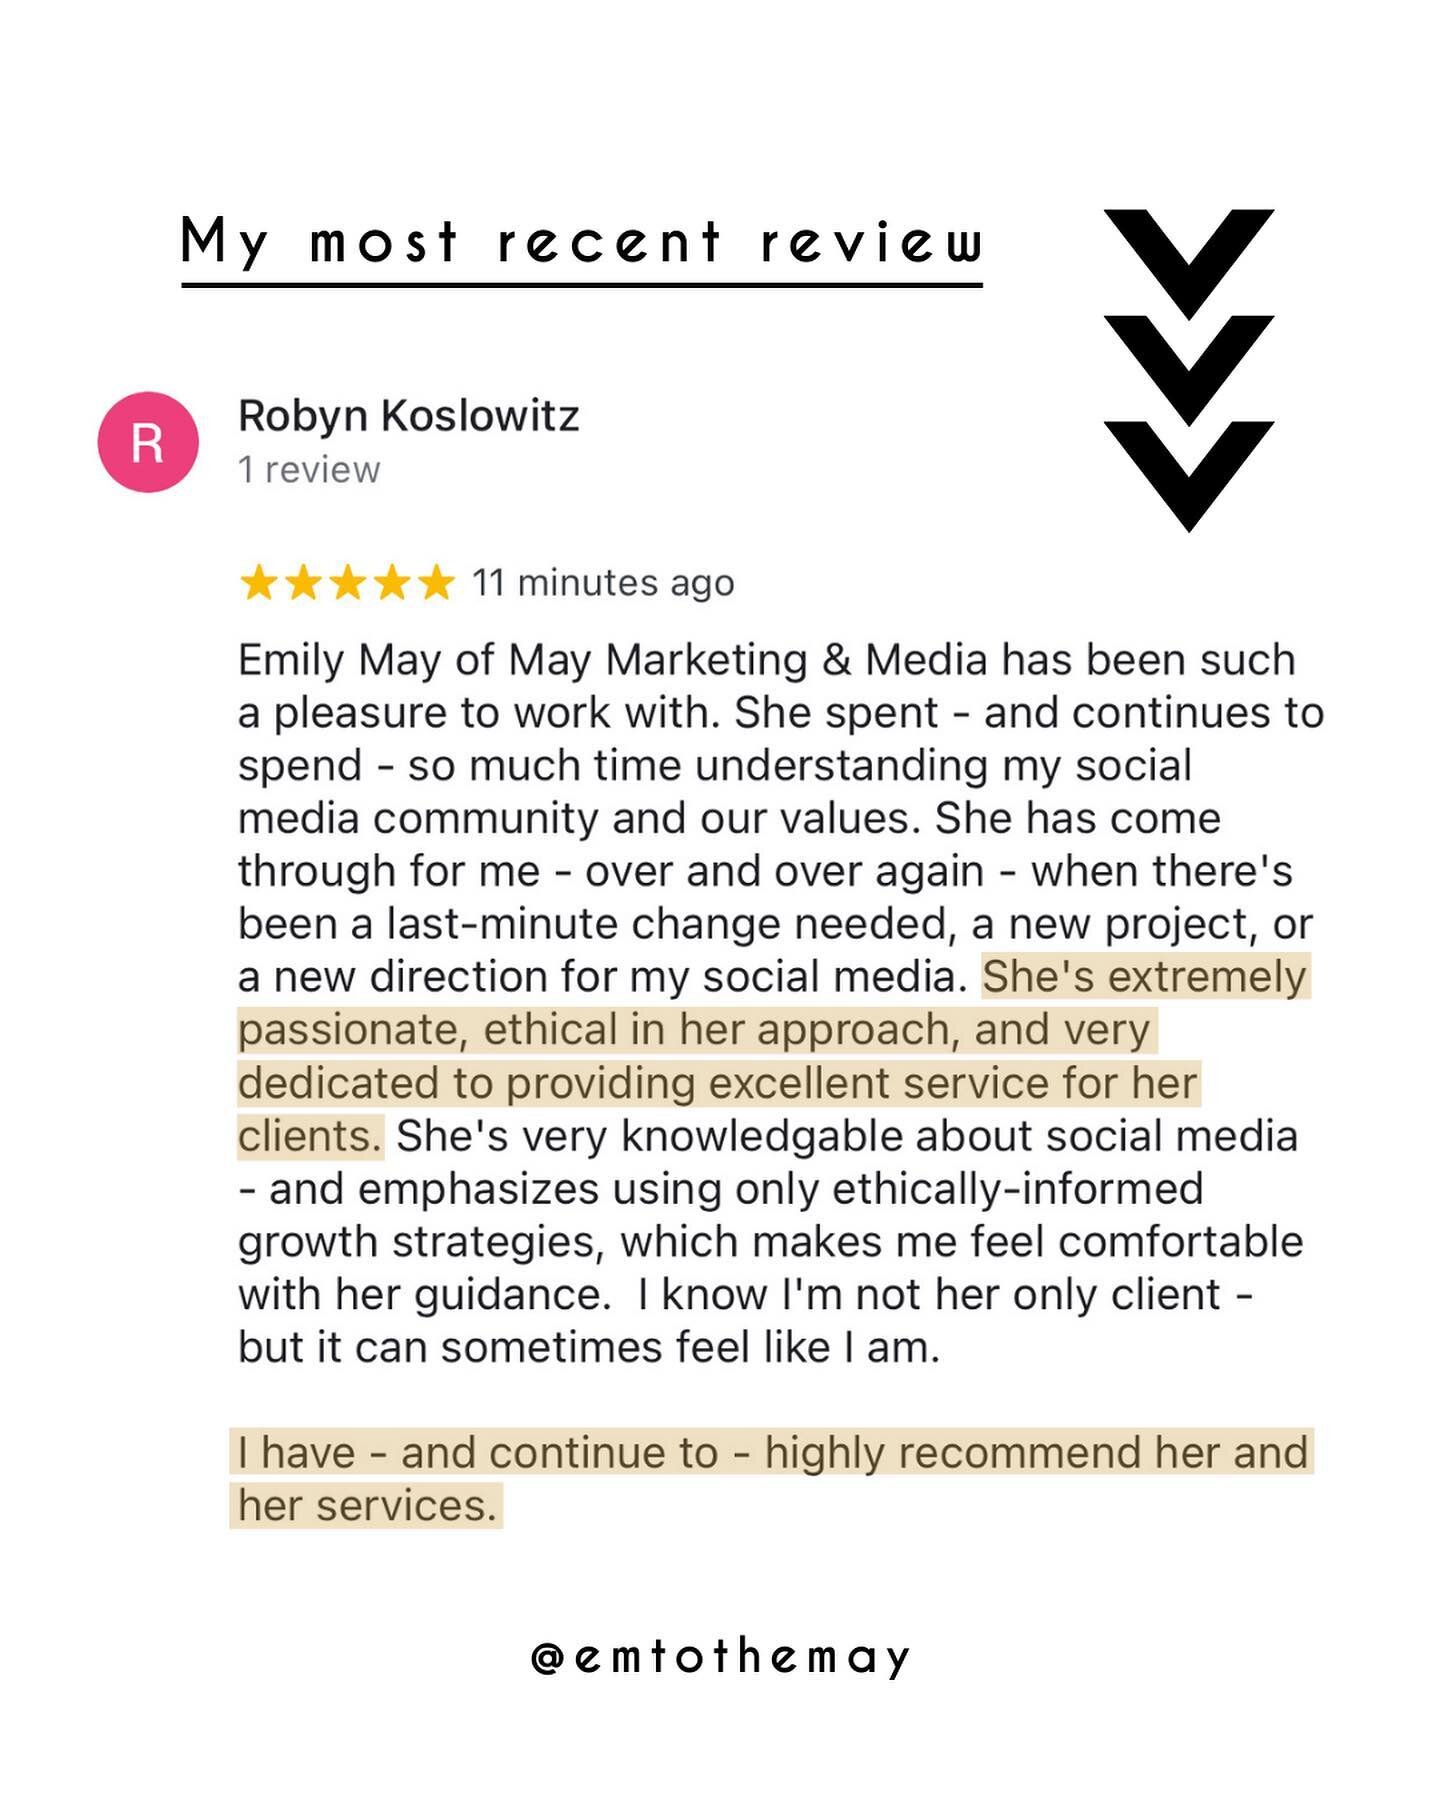 One of my professional values is ✨quality over quantity✨

I know my limits and won't take on more of a client load than I can carry. 

Every client deserves to feel like they are your priority- and honestly hearing this client say that she often feel